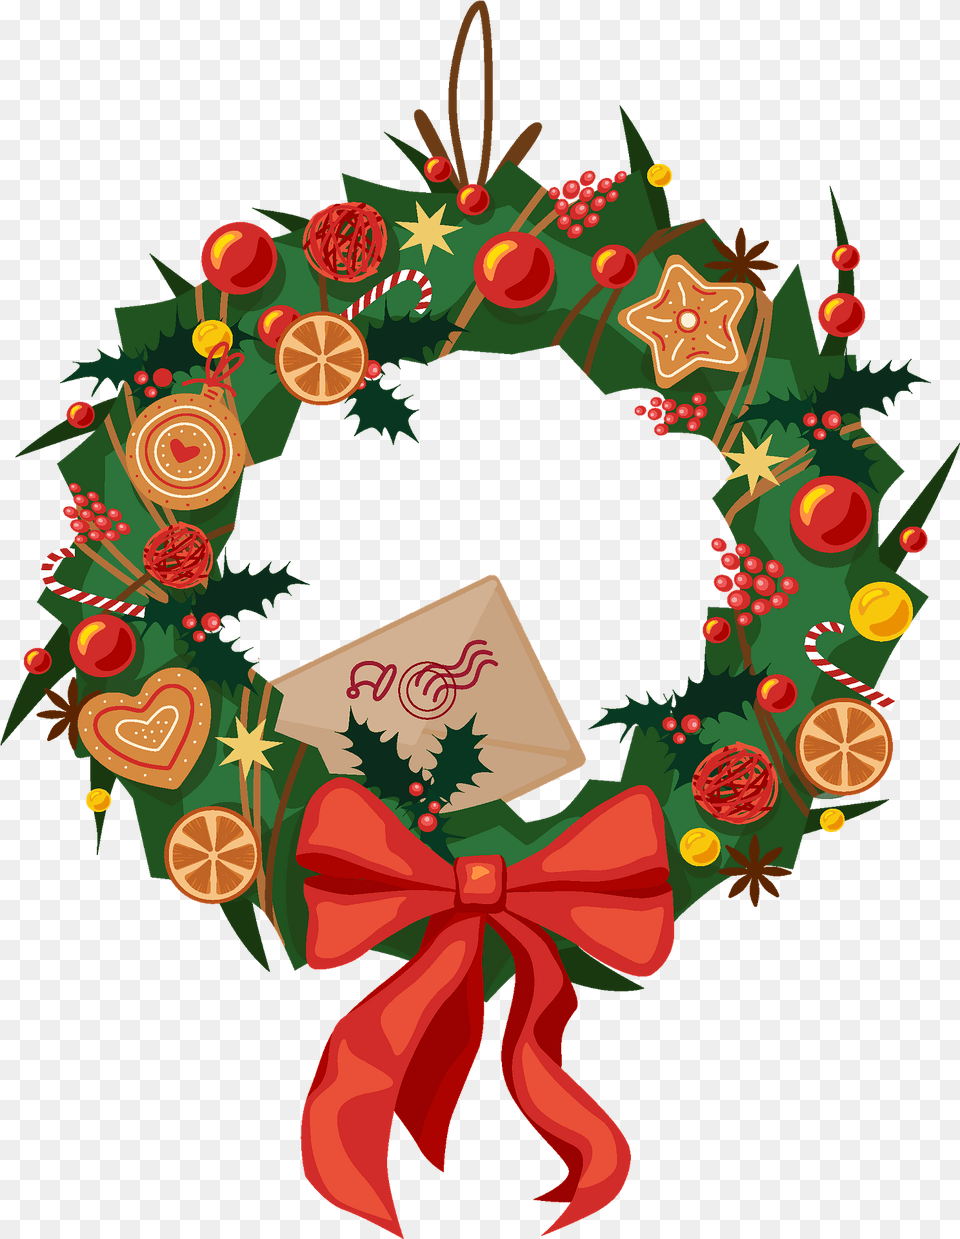 Christmas Wreath Clipart Wreath Free Transparent Png